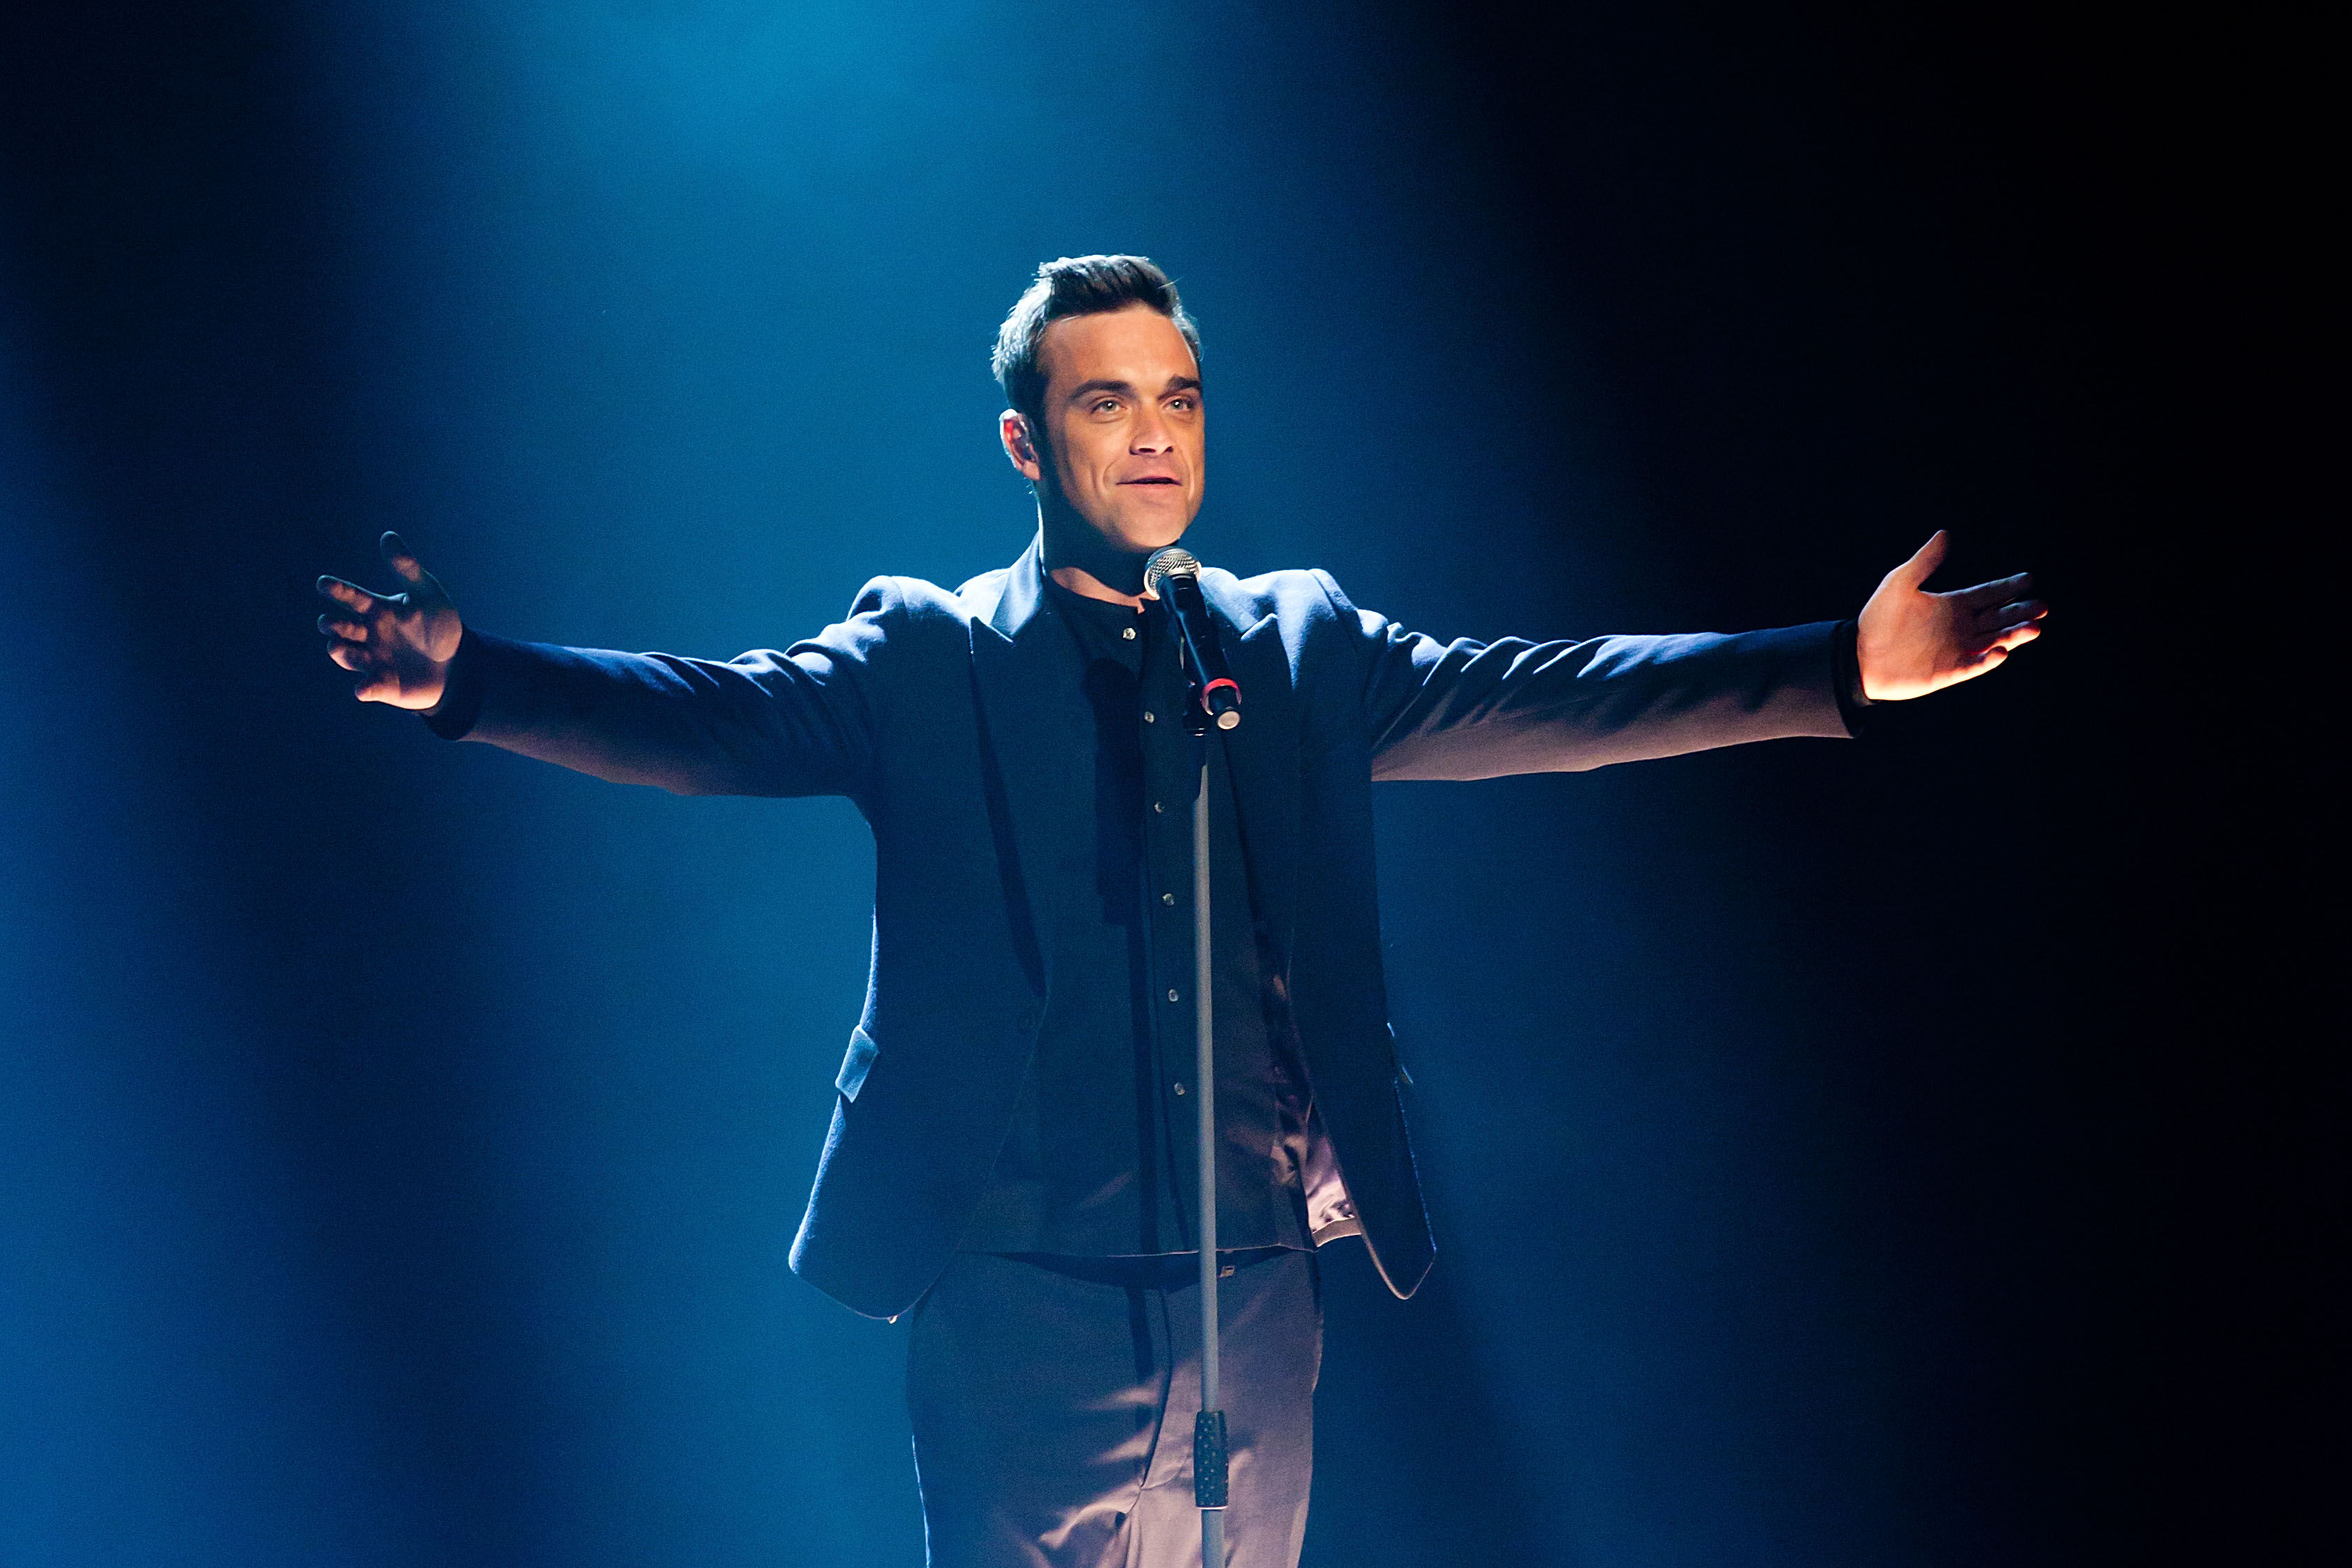 Robbie Williams is releasing his first ever Christmas album